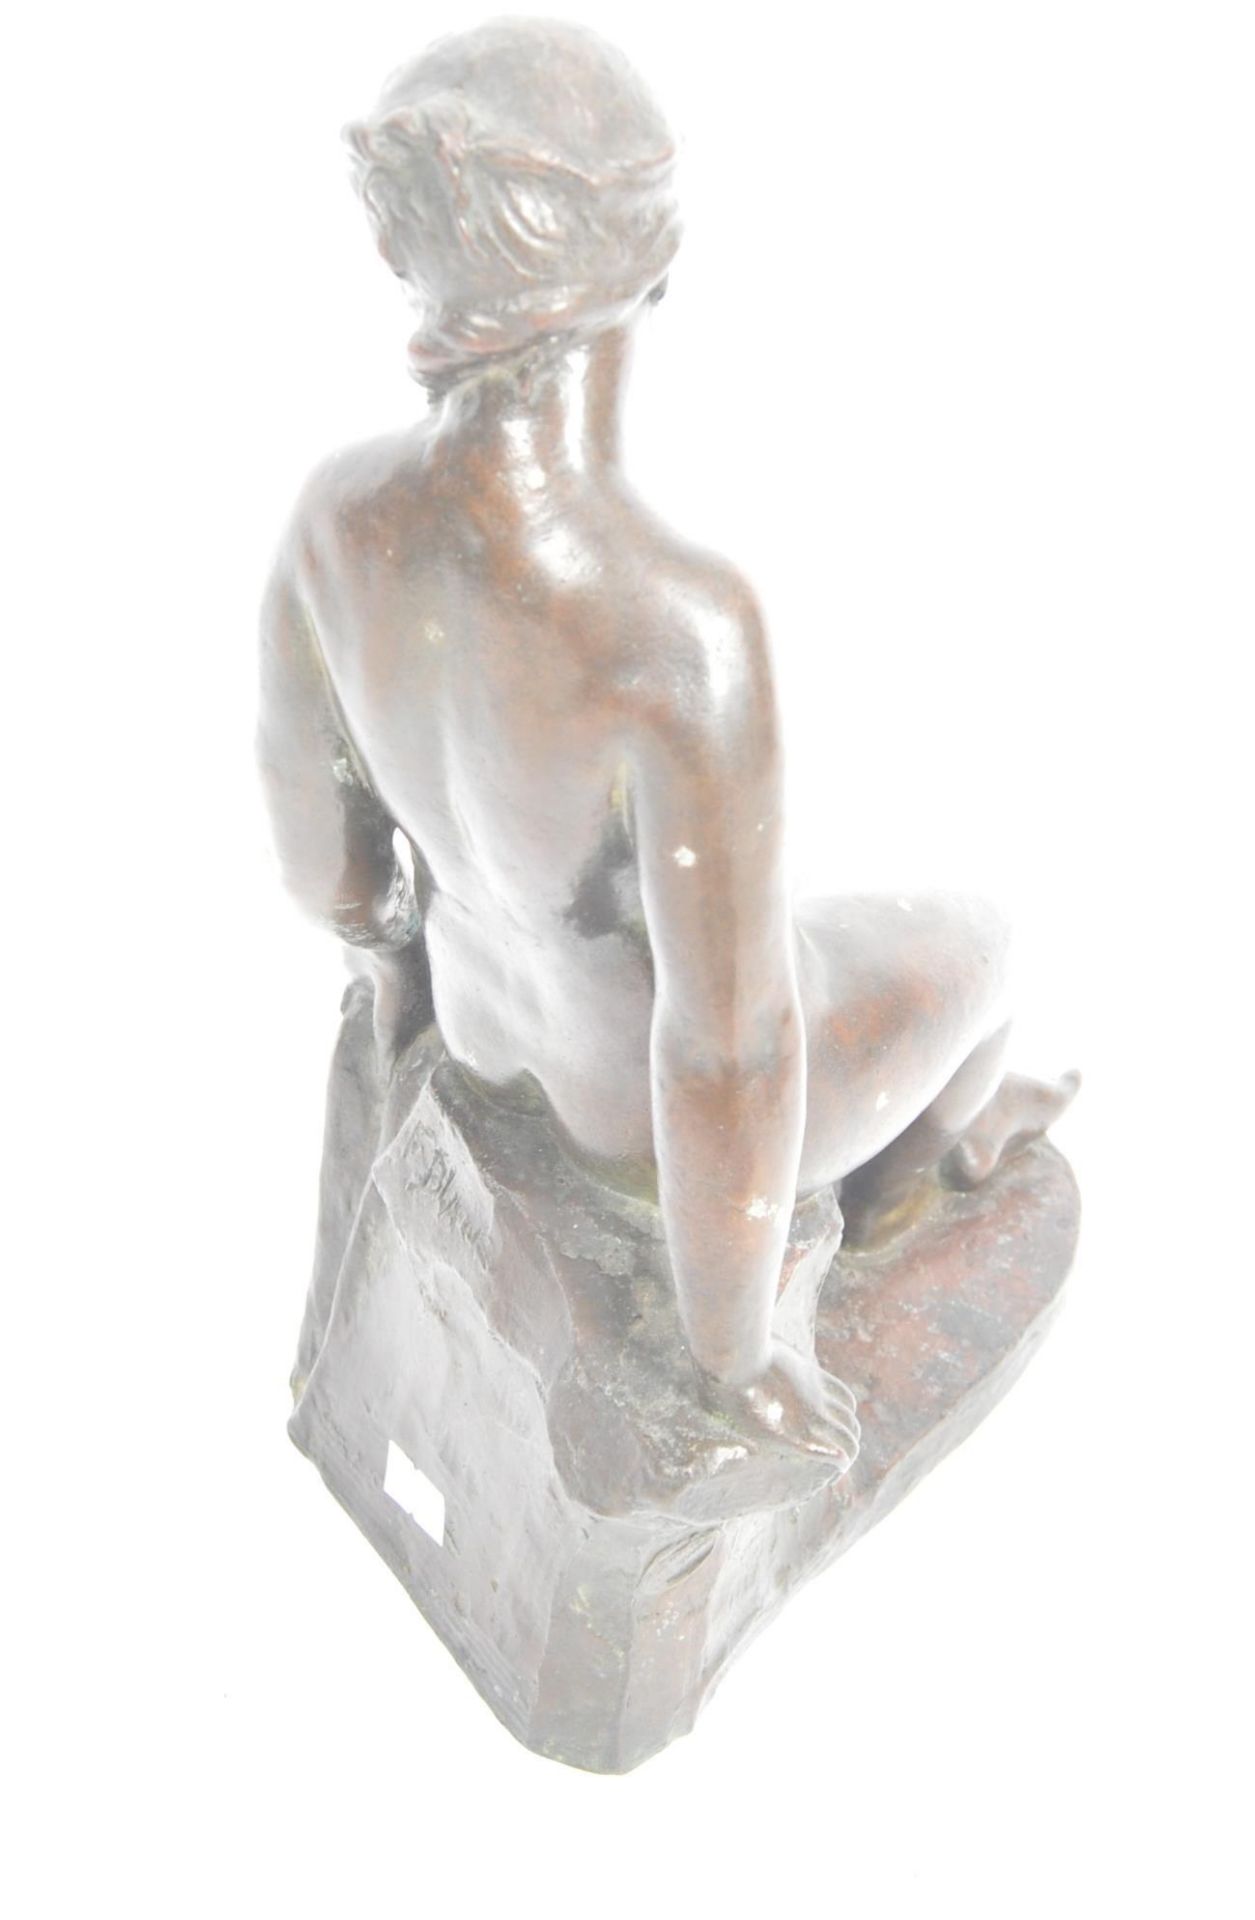 EARLY 20TH CENTURY BRONZE NUDE FIGURINE BY F BLACK - Image 4 of 5